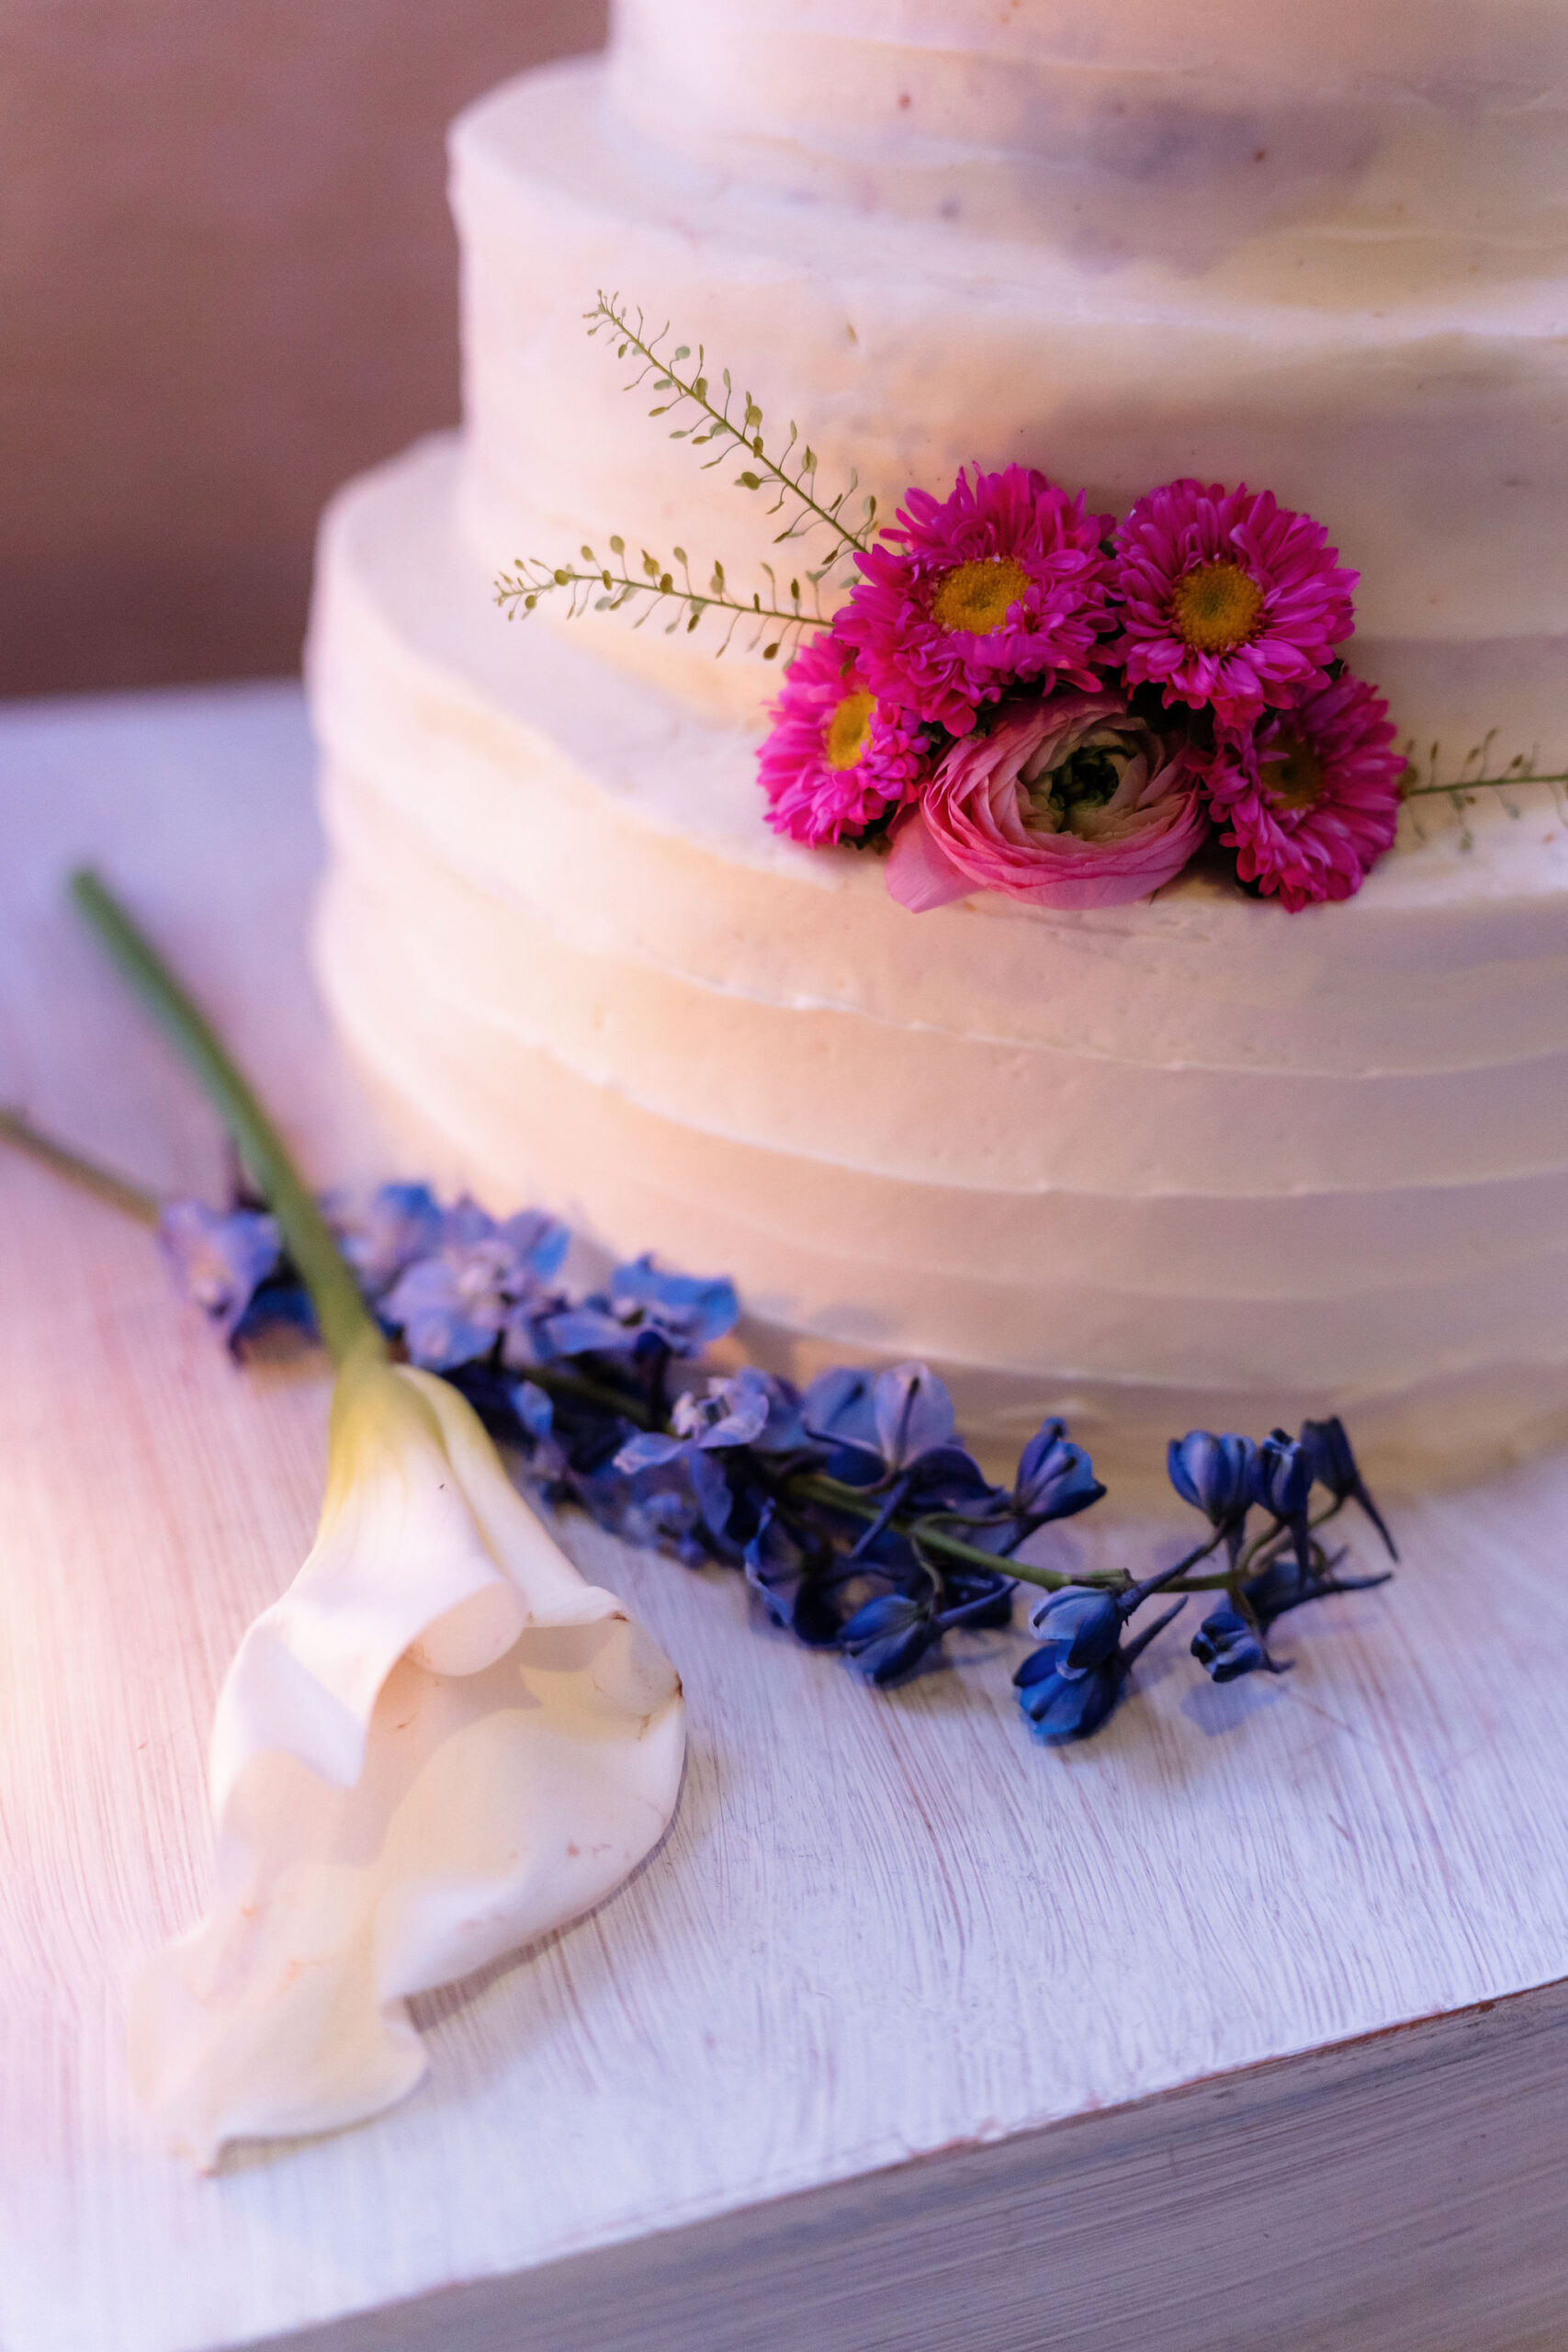 wedding cake at the Reeds by Lisa Blanche Photography